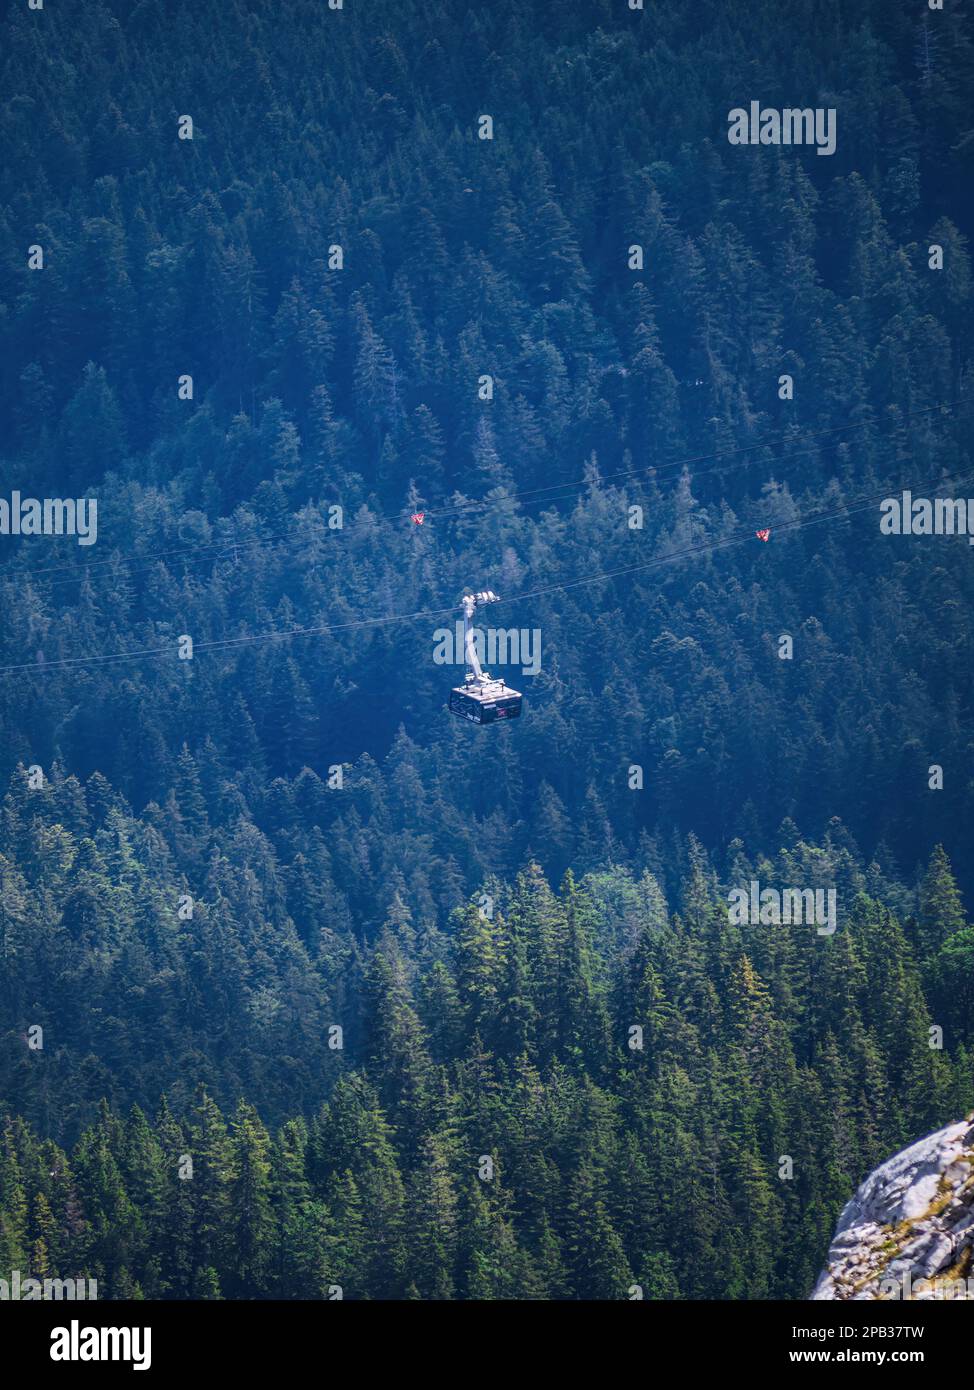 Zugspitzbahn cable car going up to Zugspitze mountain over a forest aerial view Stock Photo